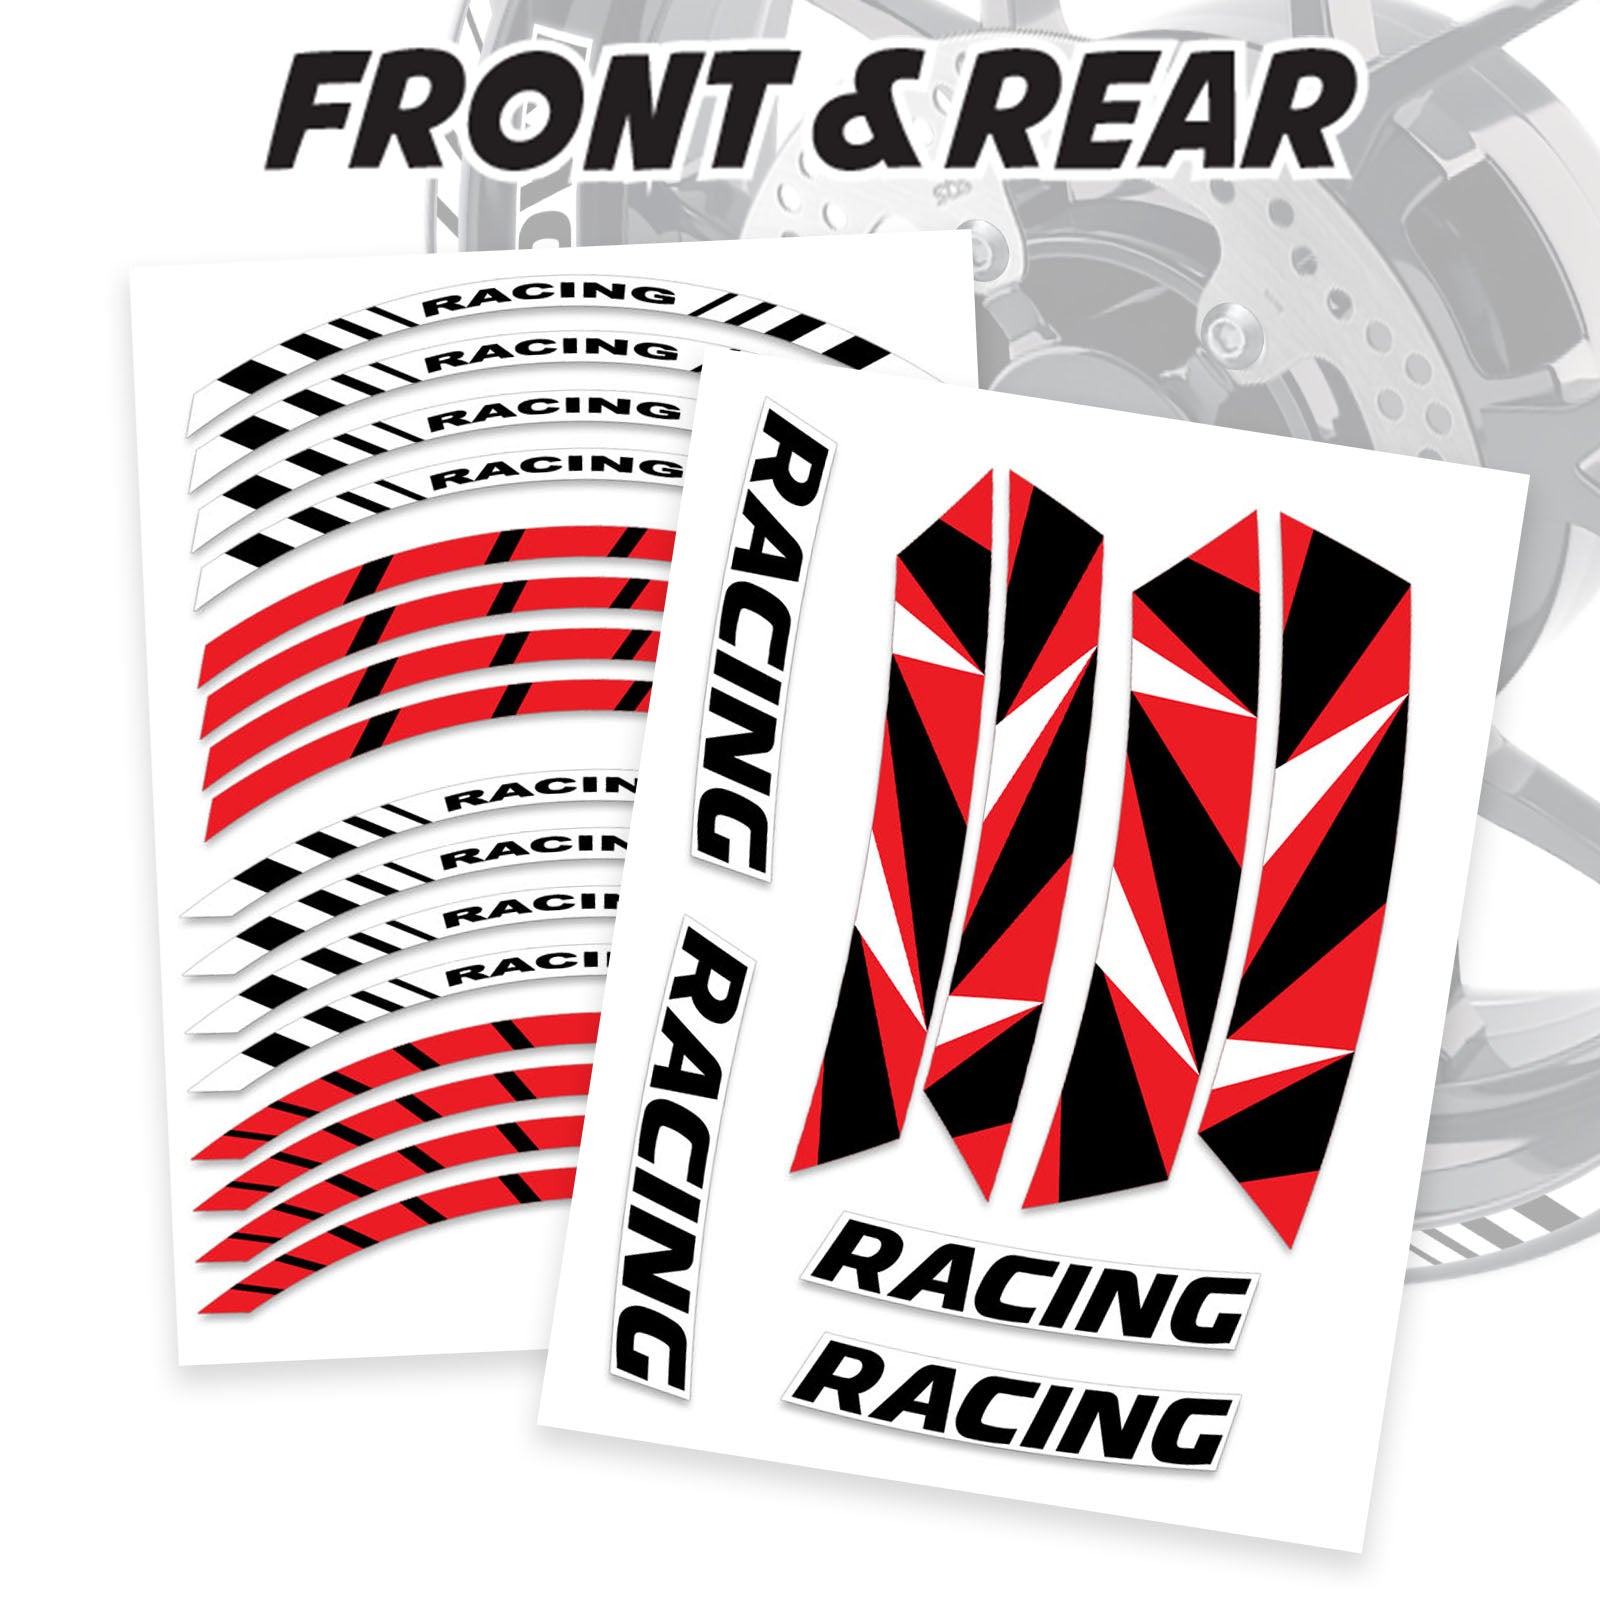 Red Motorcycle Front & Rear Wheel Rim Sticker Racing Triangle